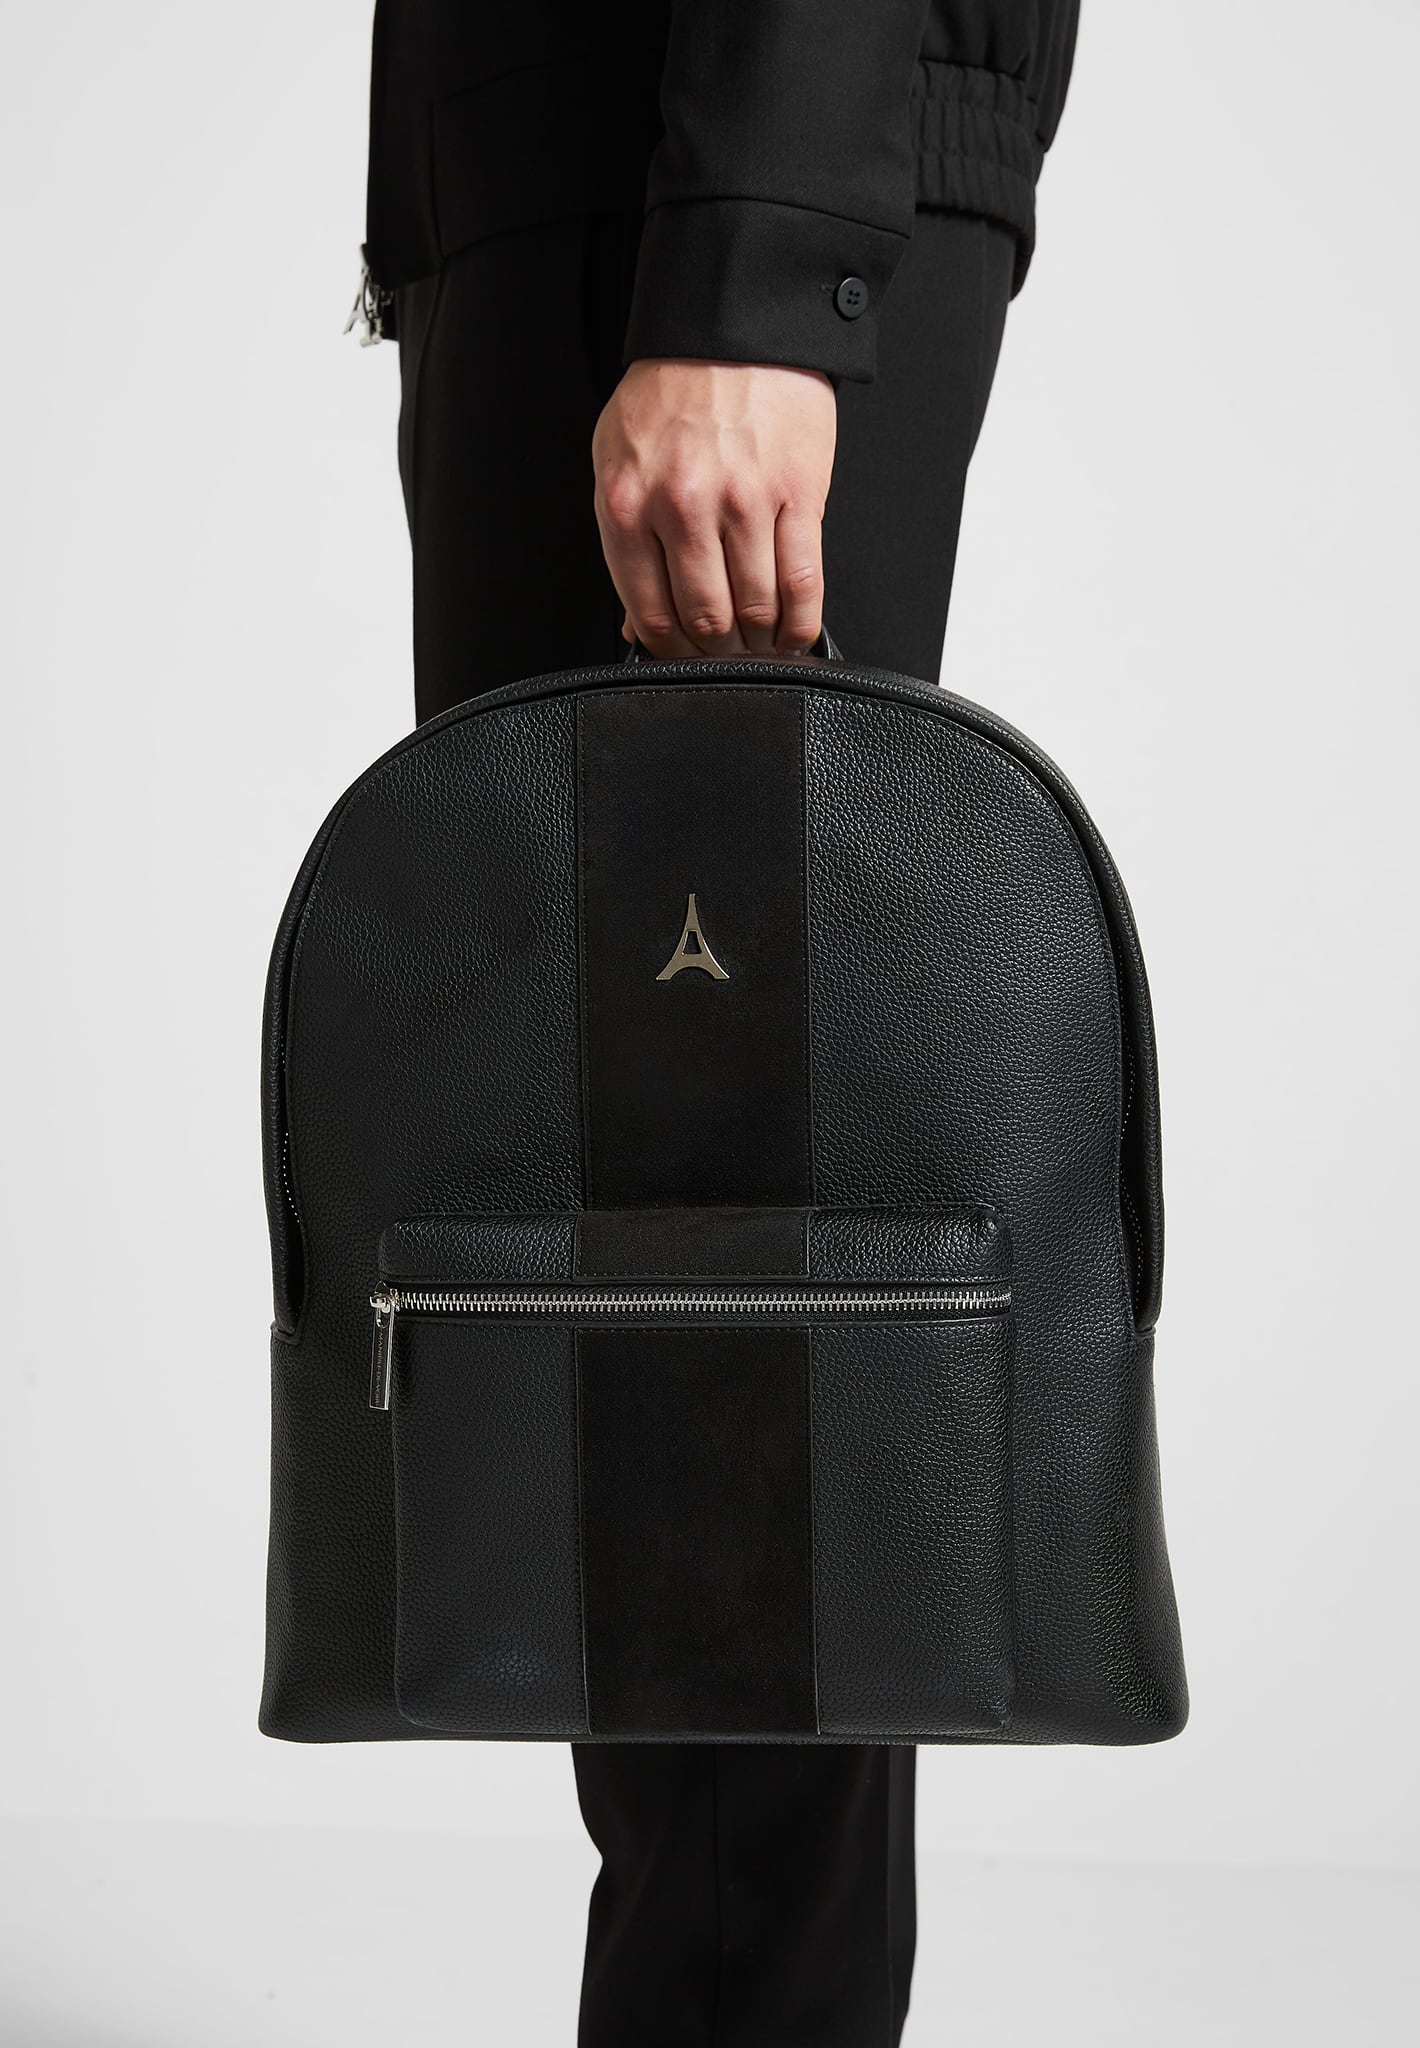 vegan-leather-backpack-with-suede-panel-black-2